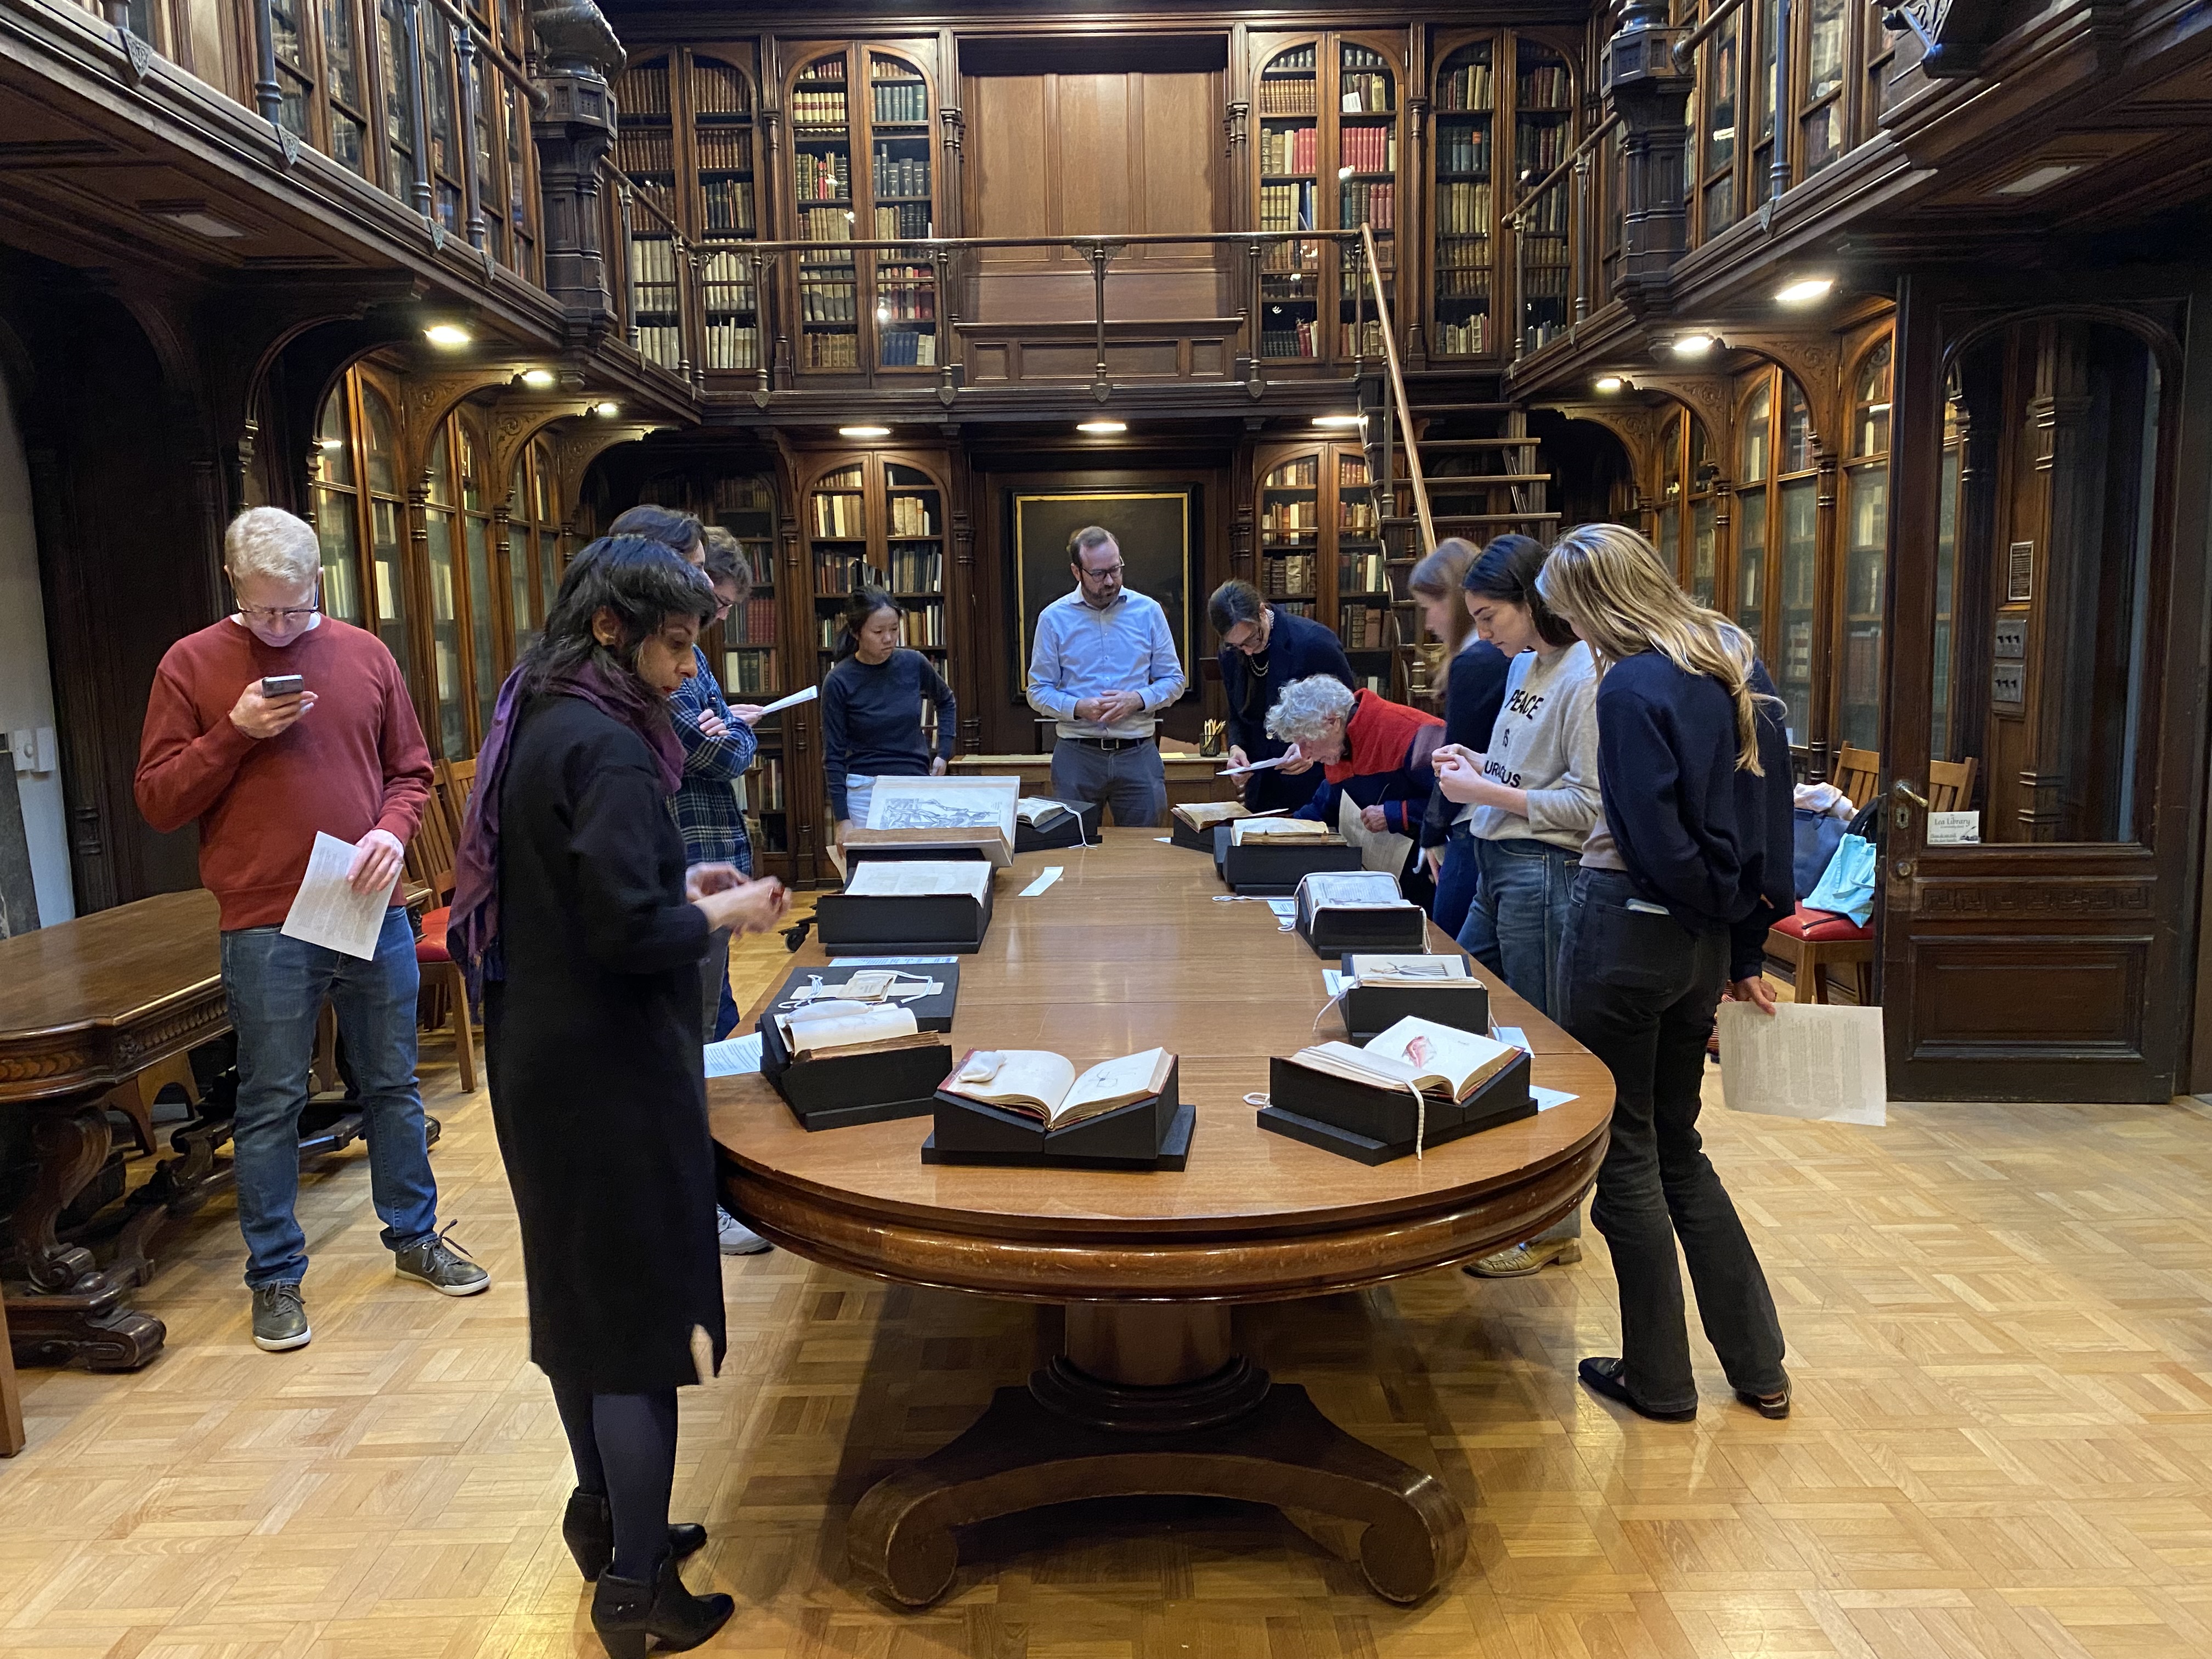 People lookiing at books on a table in a historic library. 